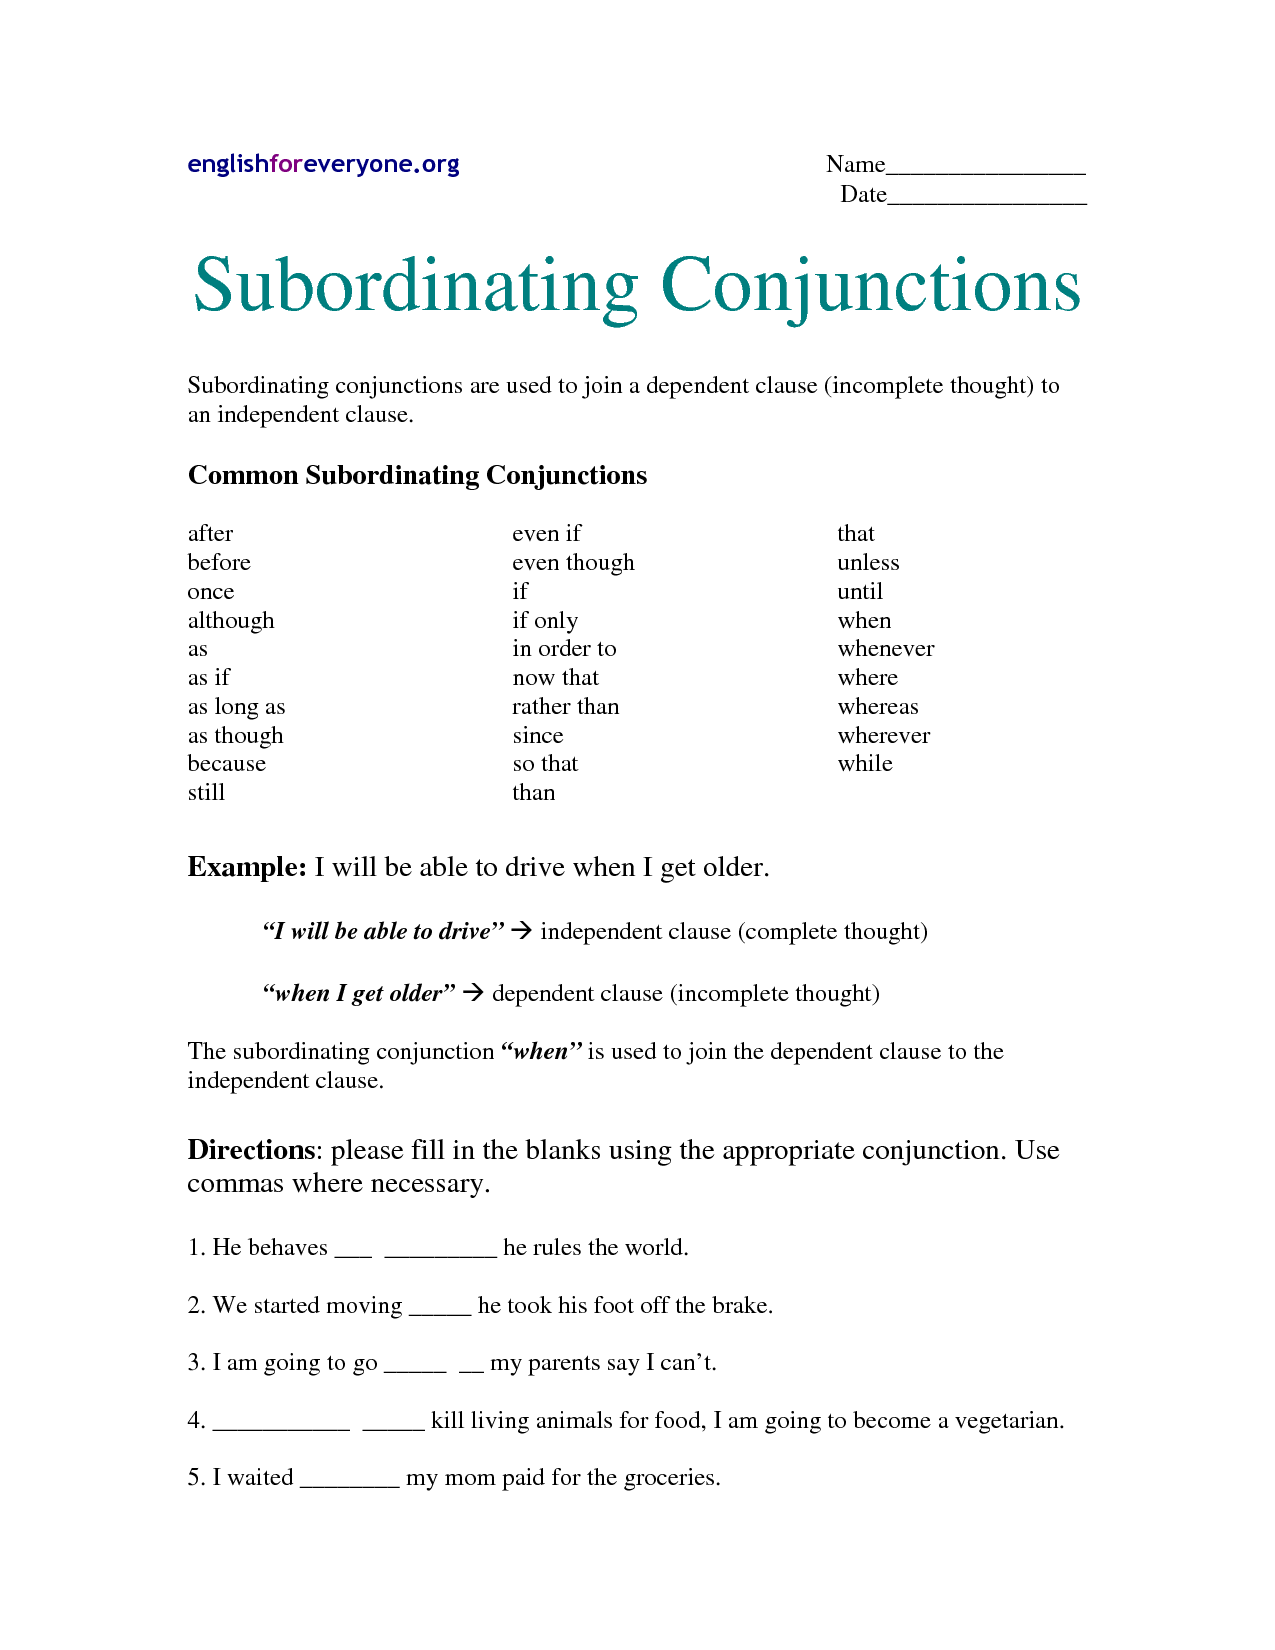 15 Best Images Of Worksheets Using Conjunctions Subordinating 